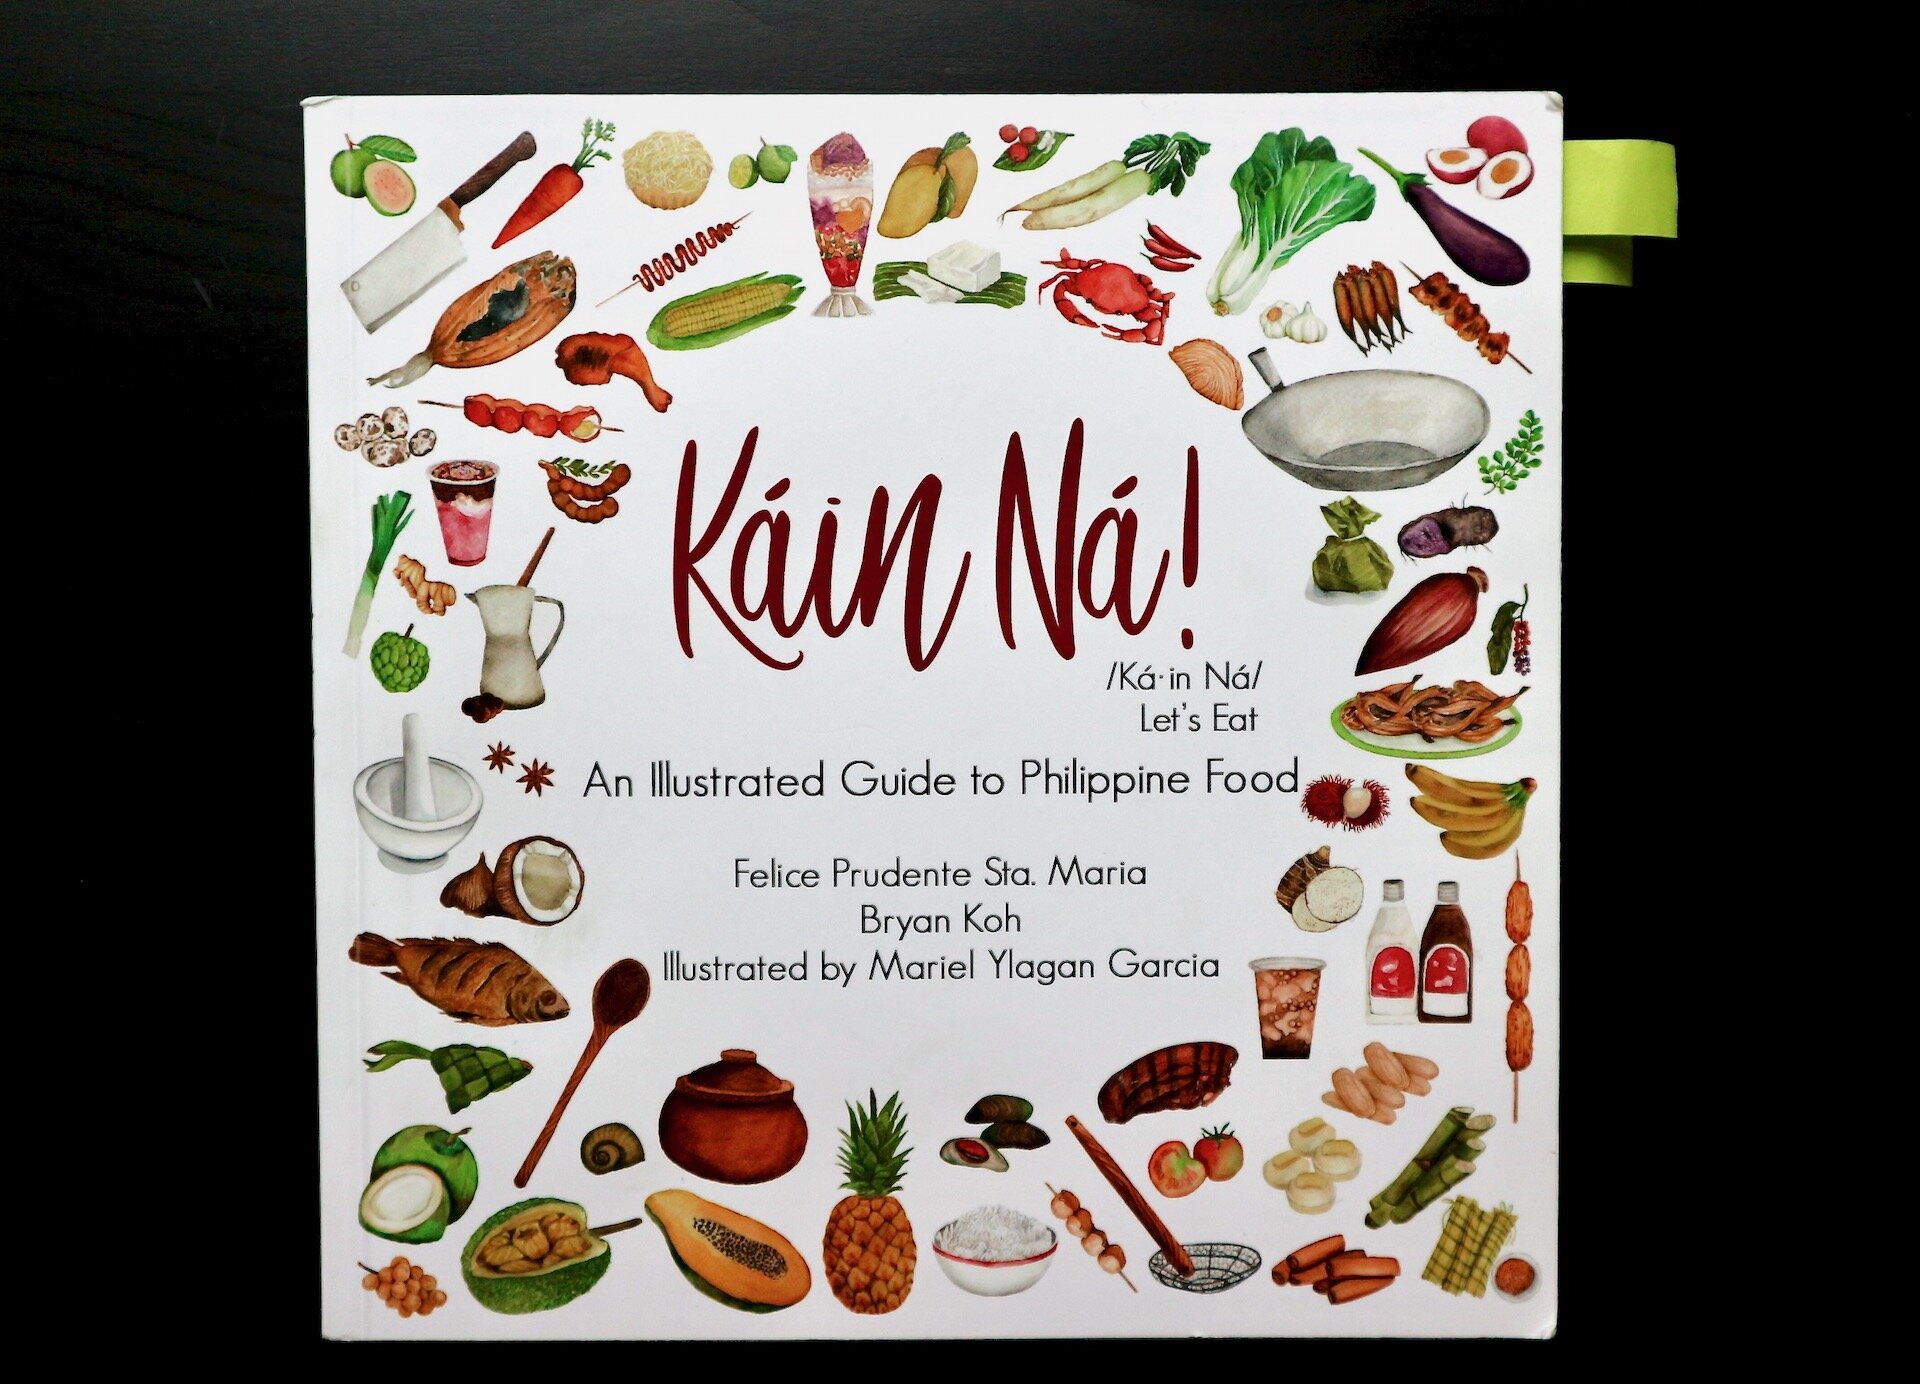 Kain Na! An Illustrated Guide to Philippine Food by Felice Prudente Sta. Maria and Bryan Koh